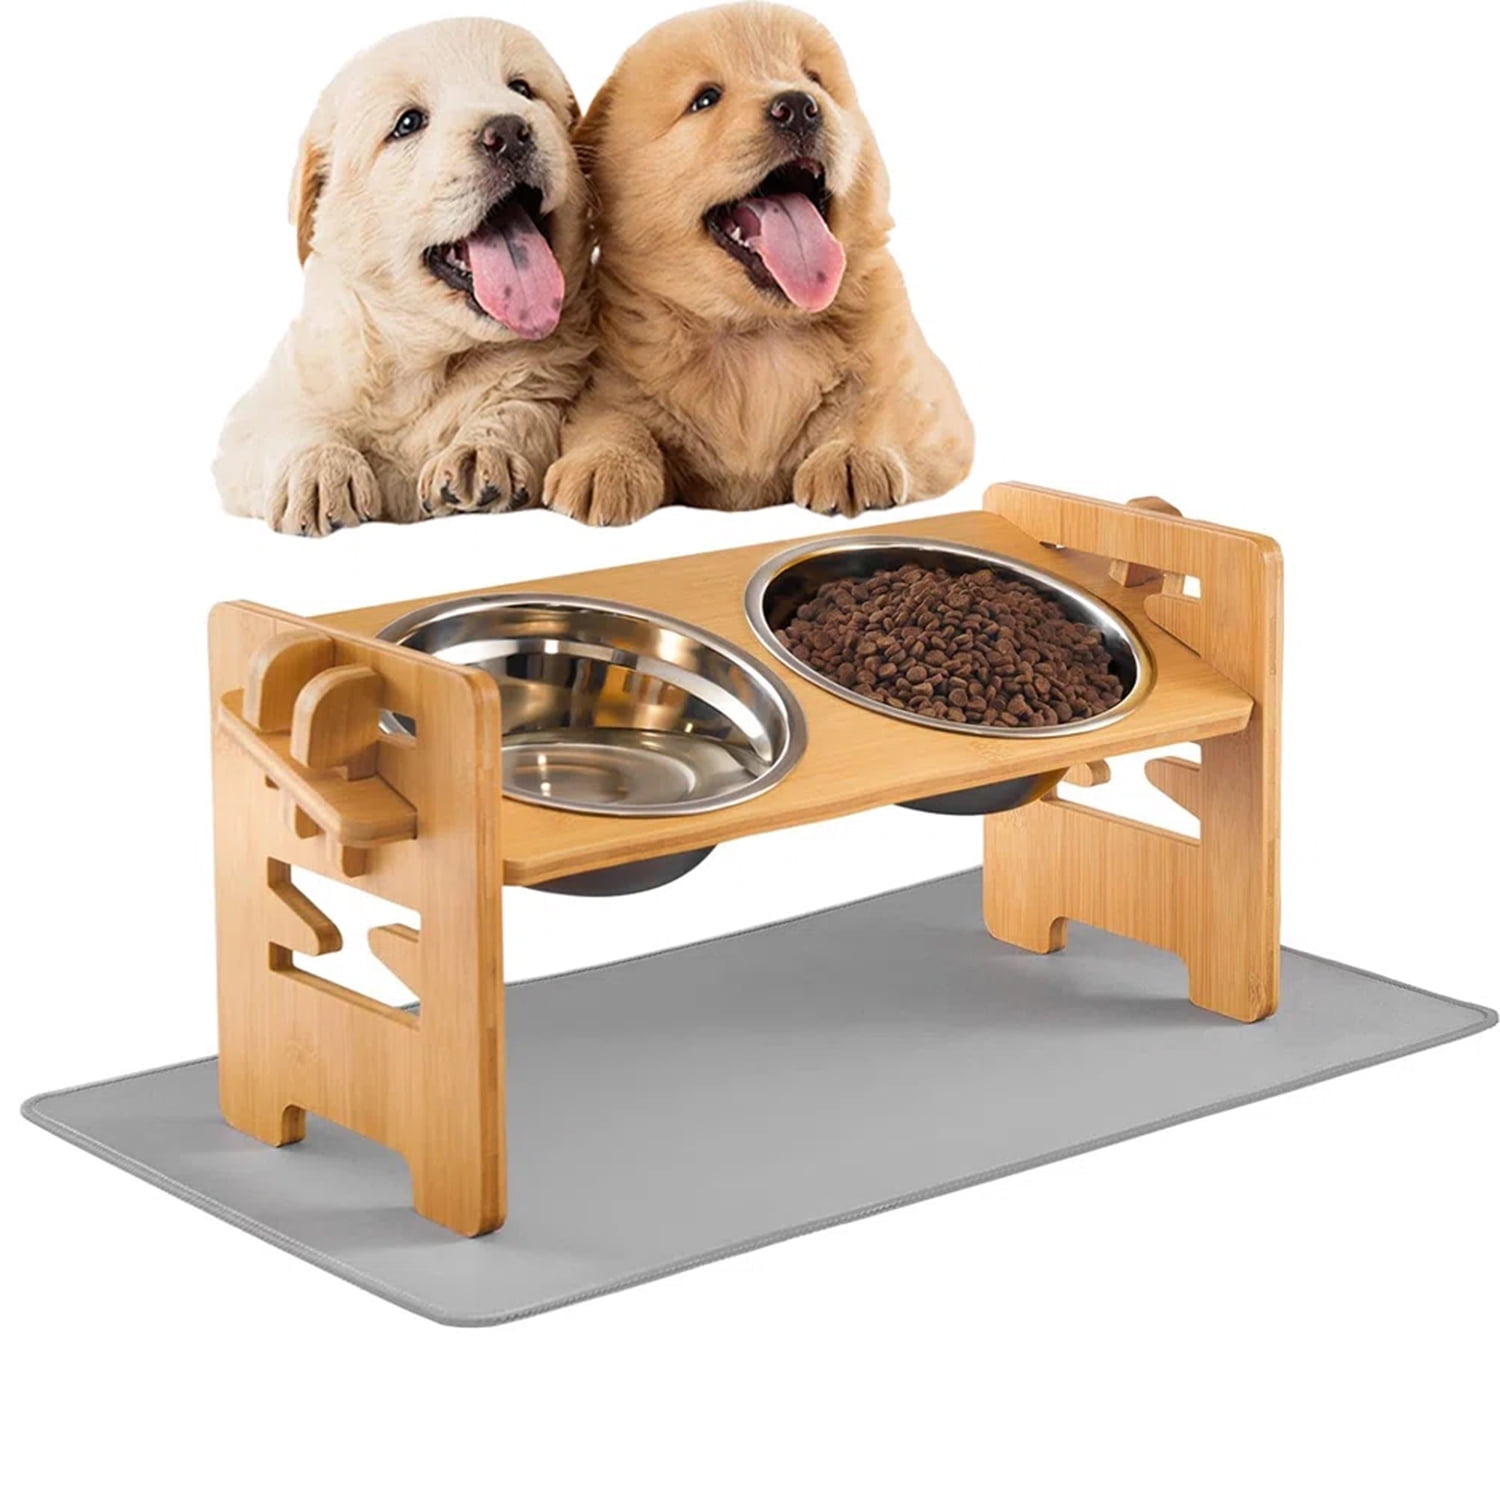 Elevated Dog Bowls, Adjustable Metal Stand with Stainless Steel Bowls,Slow  Feeder Insert, Adjusts to 1.9-12.2 for Small Dogs Cats Pets